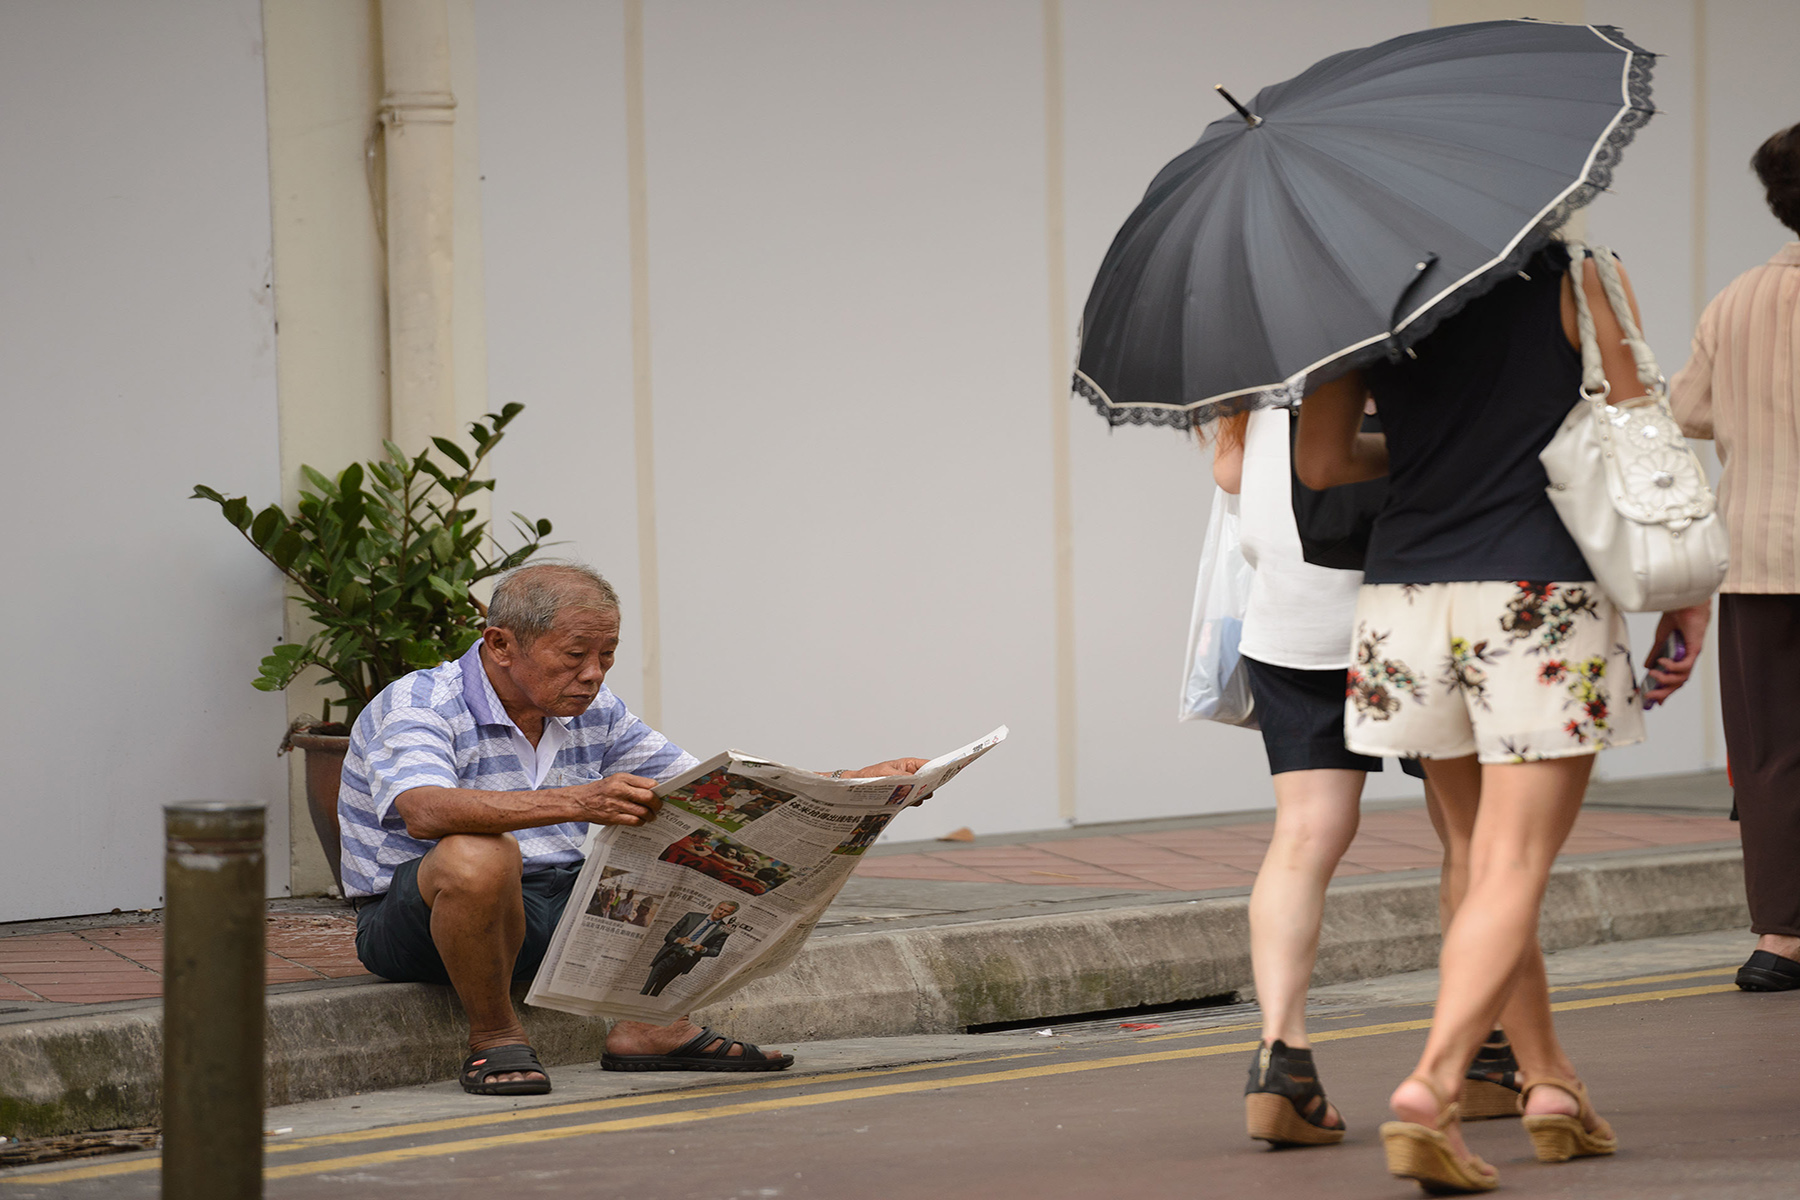 Senior man sitting on the sidewalk, relaxing and reading a newspaper, two people walk past him holding an umbrella

